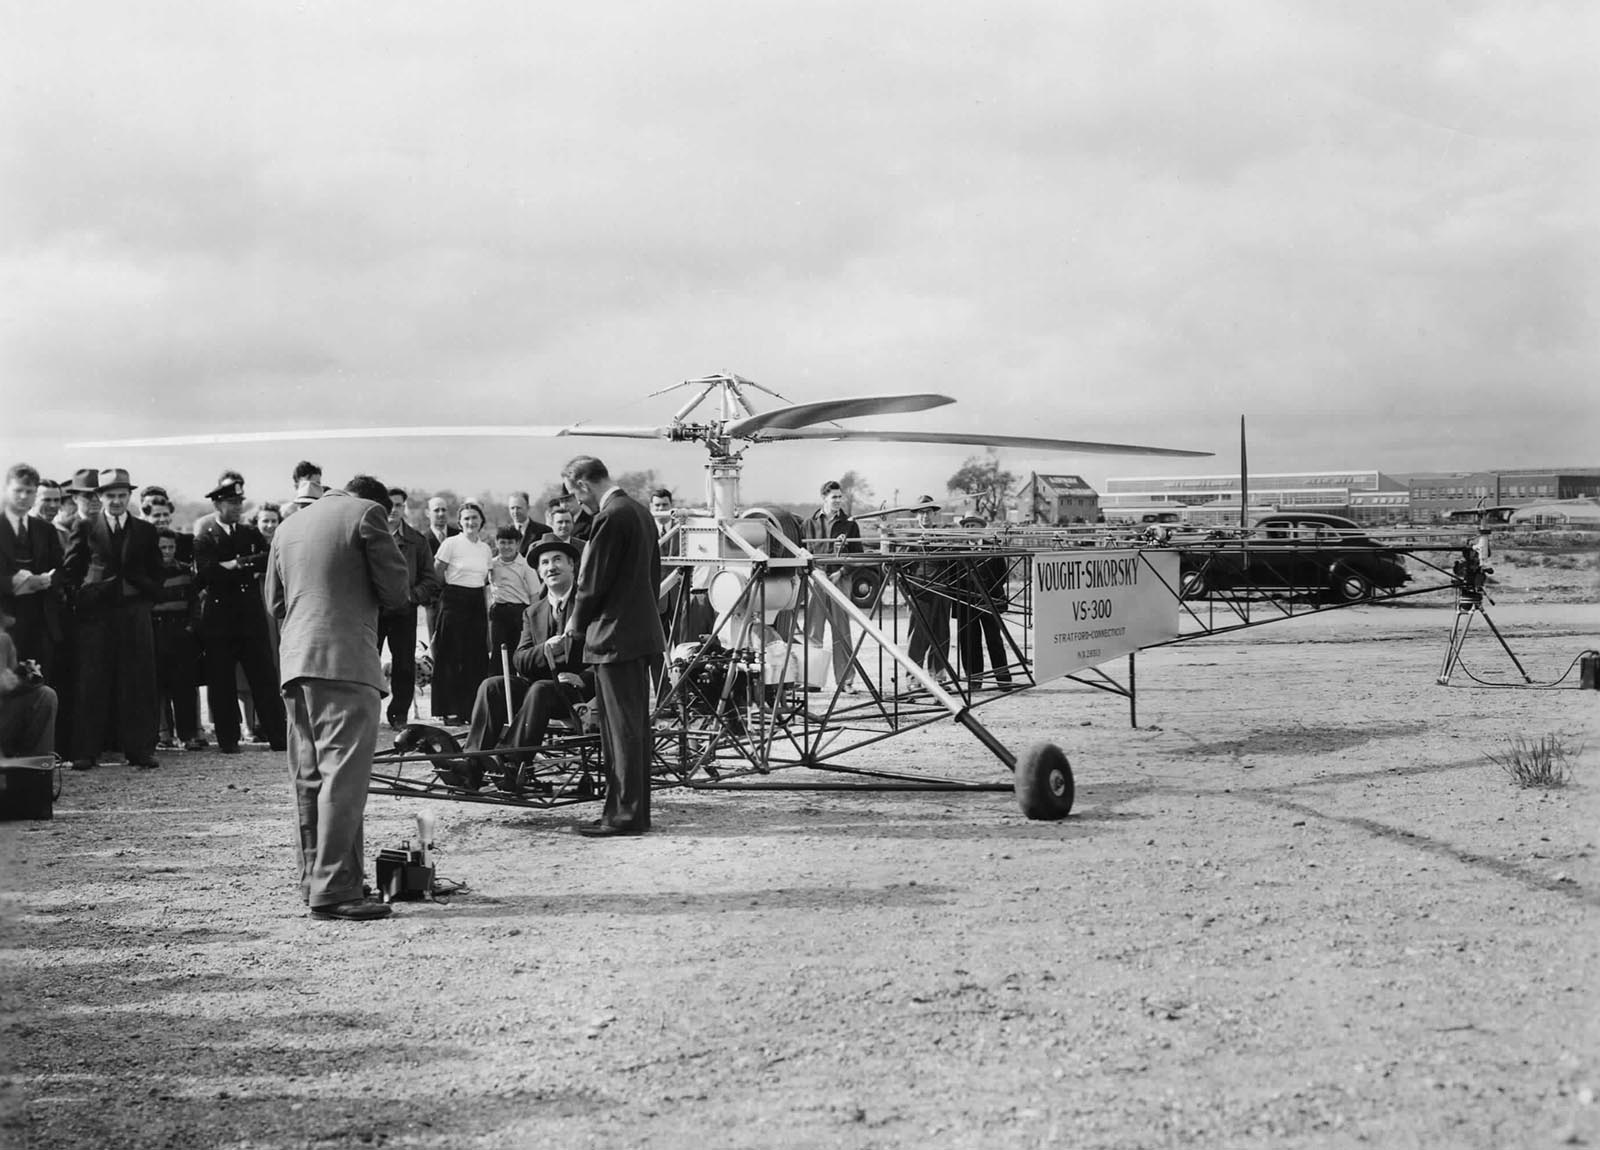 At the completion of the VS-300's first demonstration, the State of Connecticut's Commissioner of Aviation, Charles Lester Morris, presented Igor Sikorsky with Connecticut Helicopter License #1.